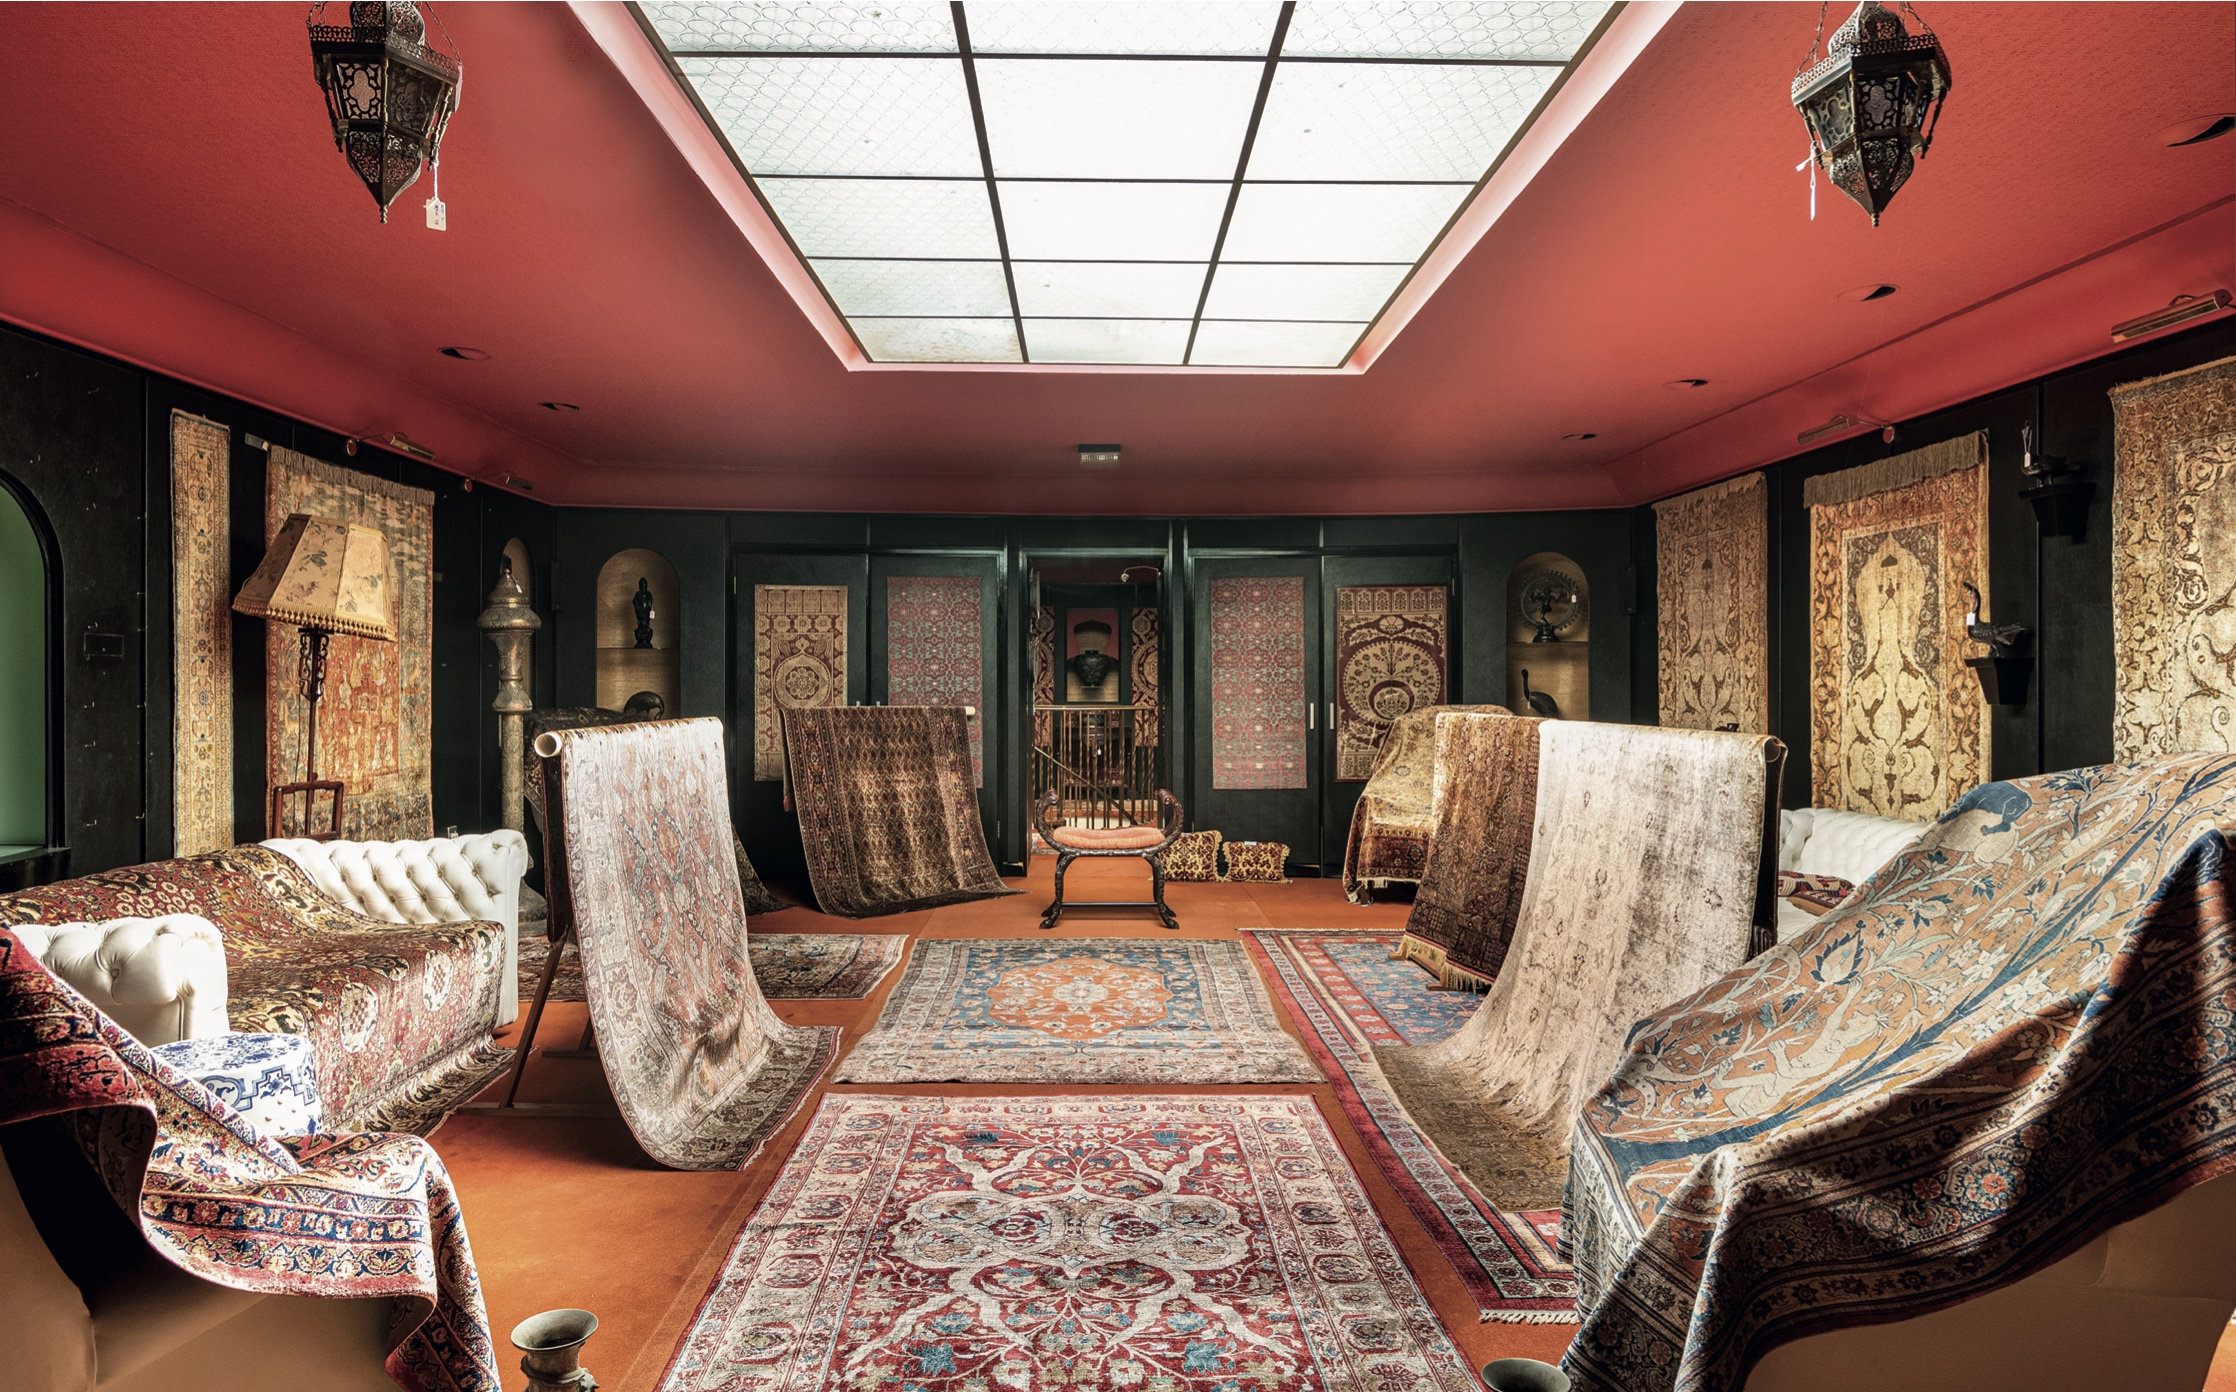 A collection of antique rugs and carpets